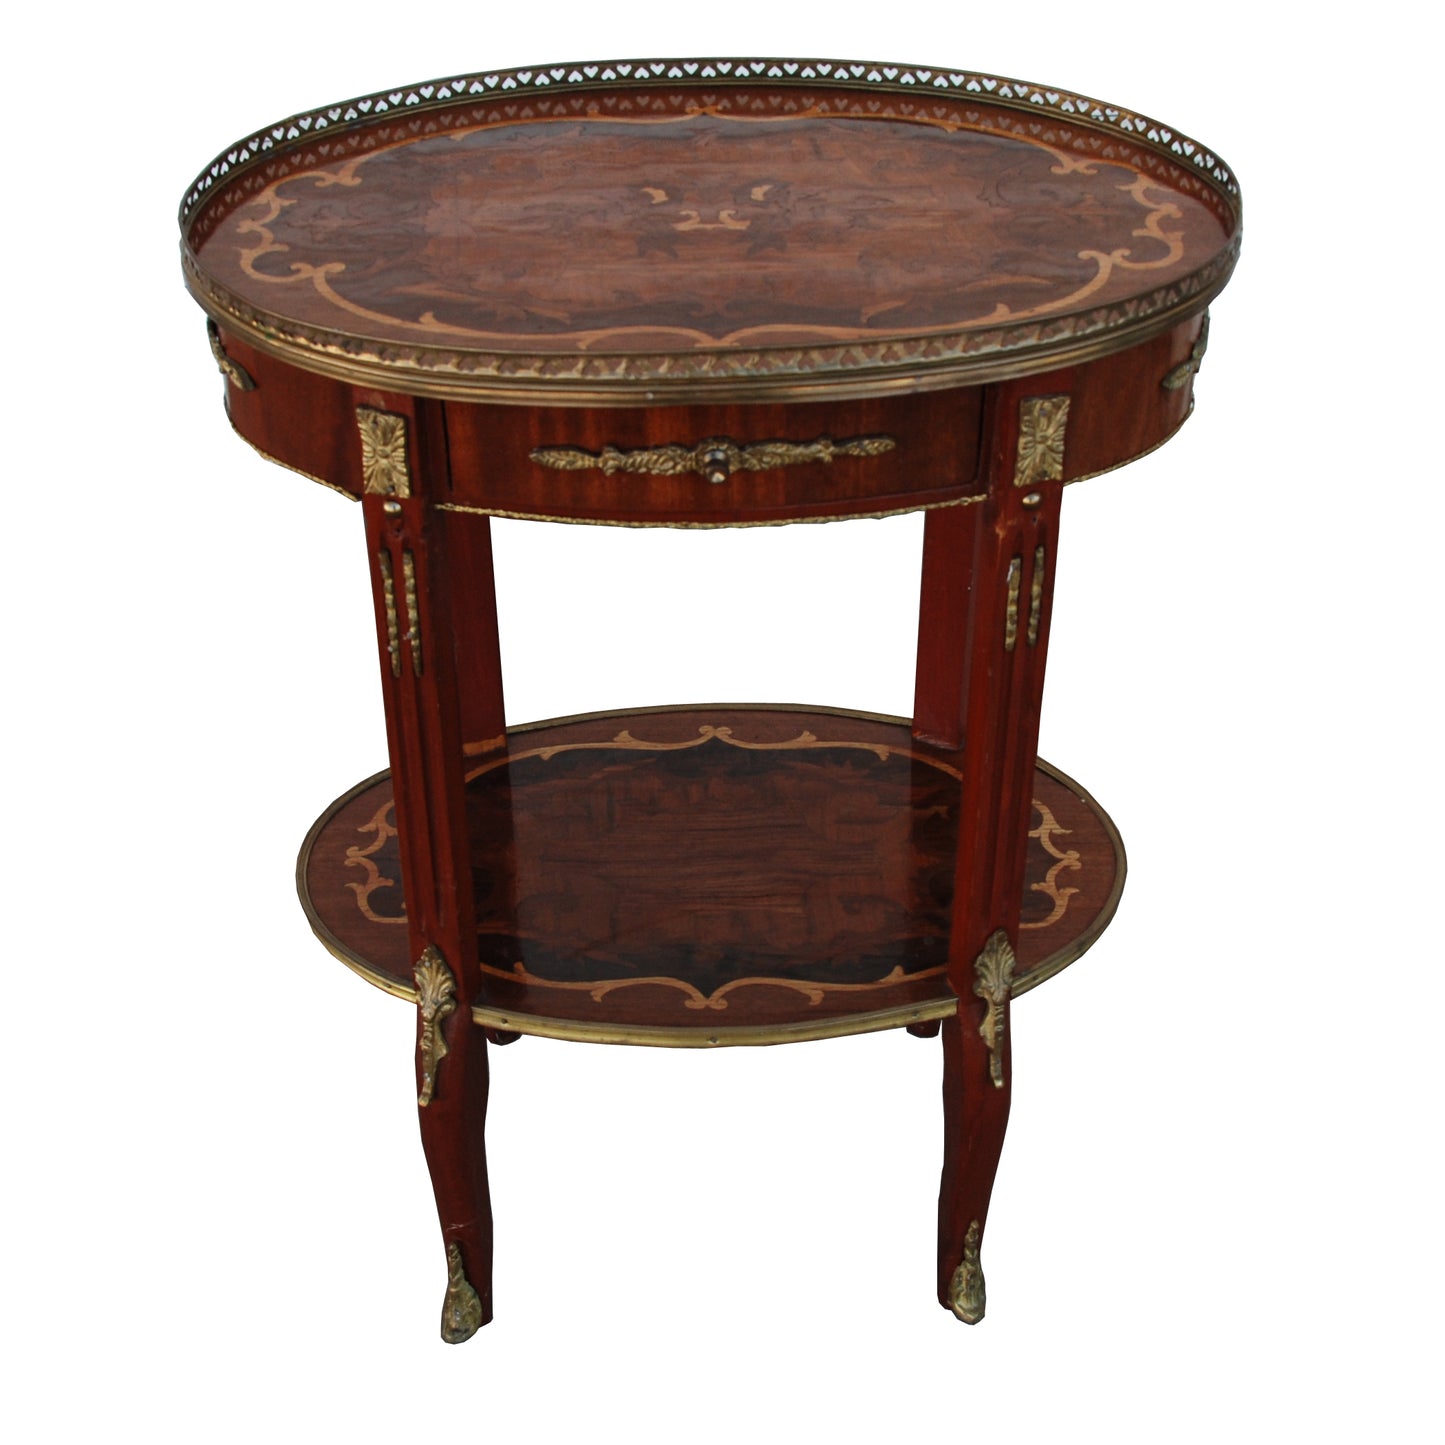 Antique French 19th Century Side Table with Gallery Edge and Marquetry Inlays